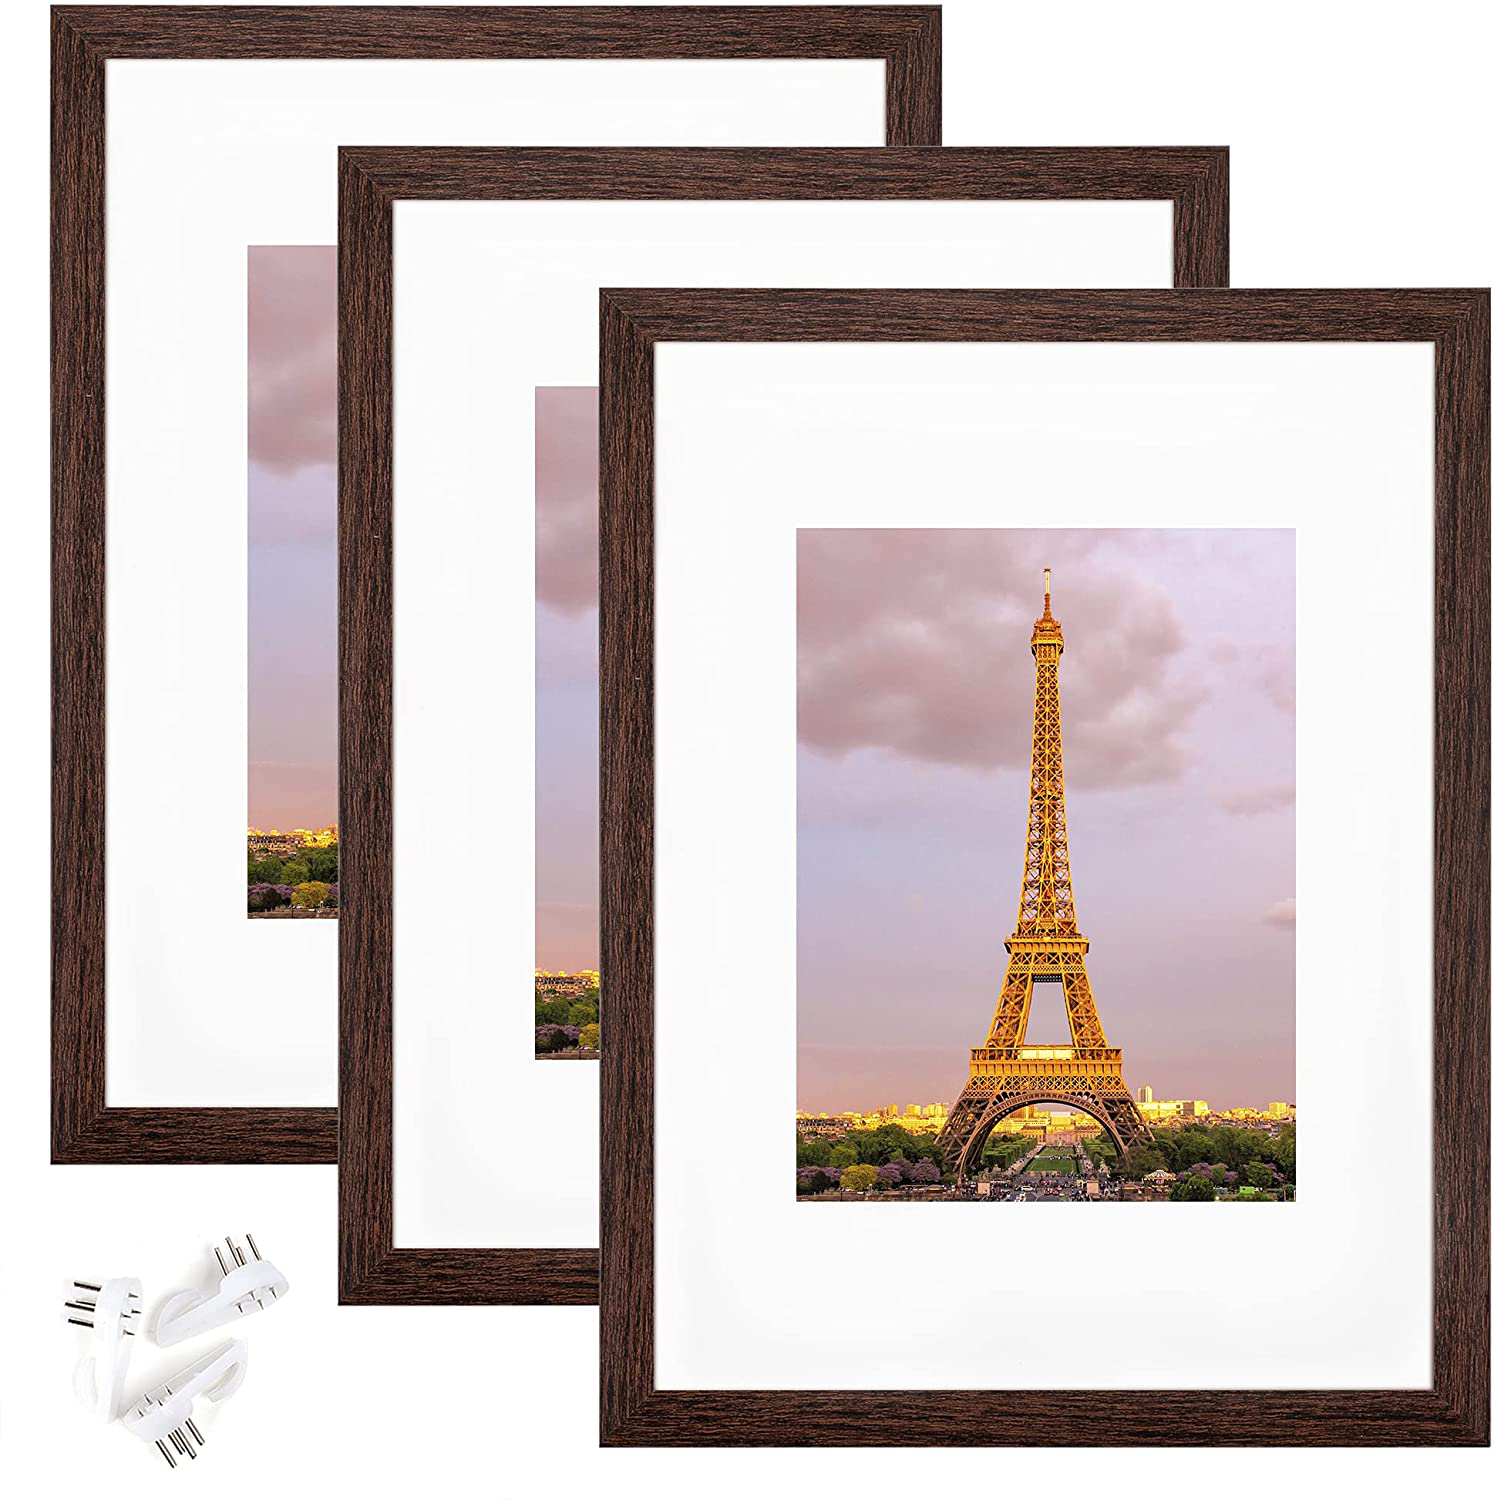 upsimples 9x12 Picture Frame Set of 3,Made of High Definition Glass for 6x8 with Mat or 9x12 Without Mat,Wall Mounting Photo Frame Dark Brown